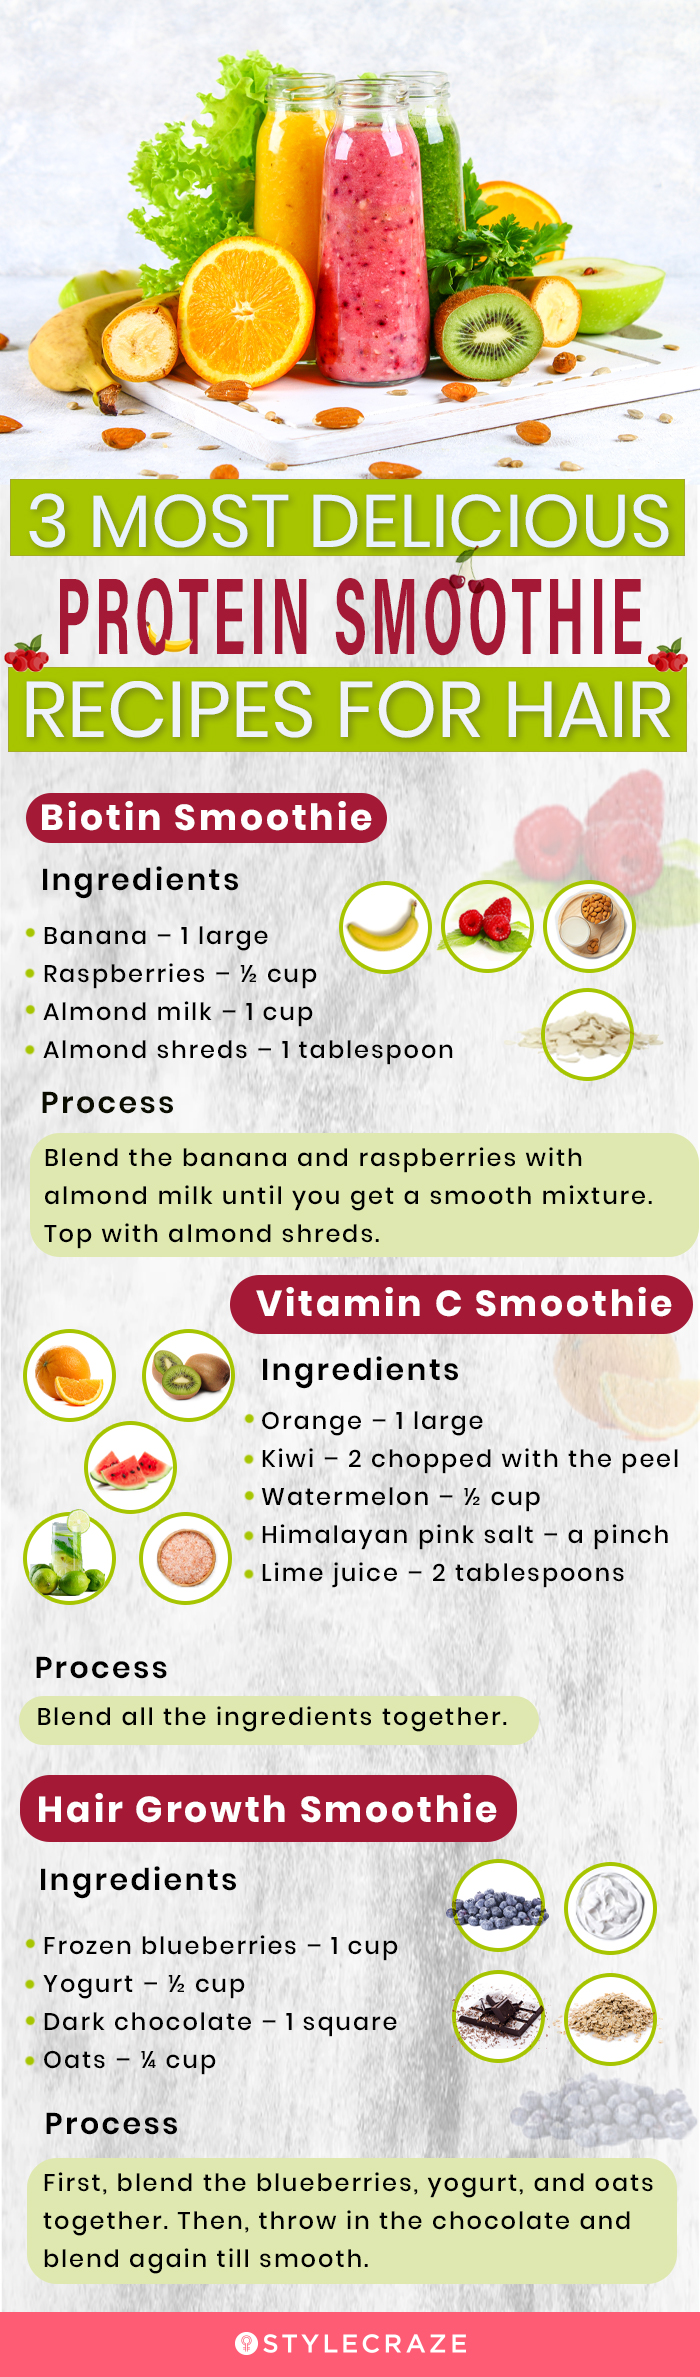 3 most delicious protein smoothie recipes for hair (infographic)